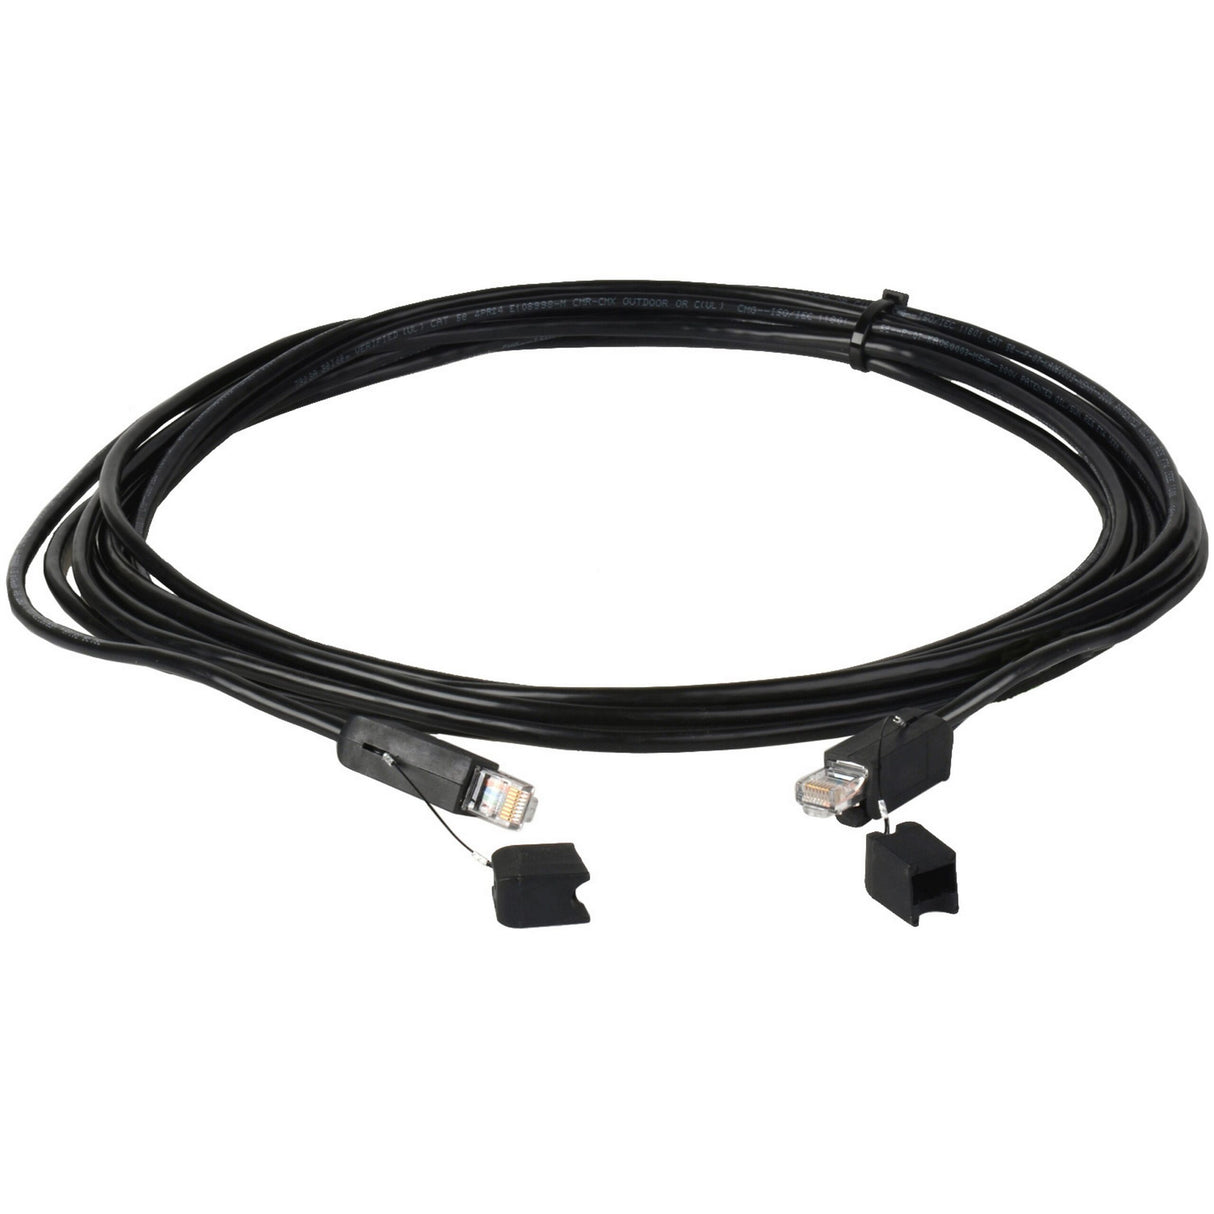 Laird TUFFCAT-25PS Super Tough Field Deployment-Ready Cat5e Cable, 25-Foot